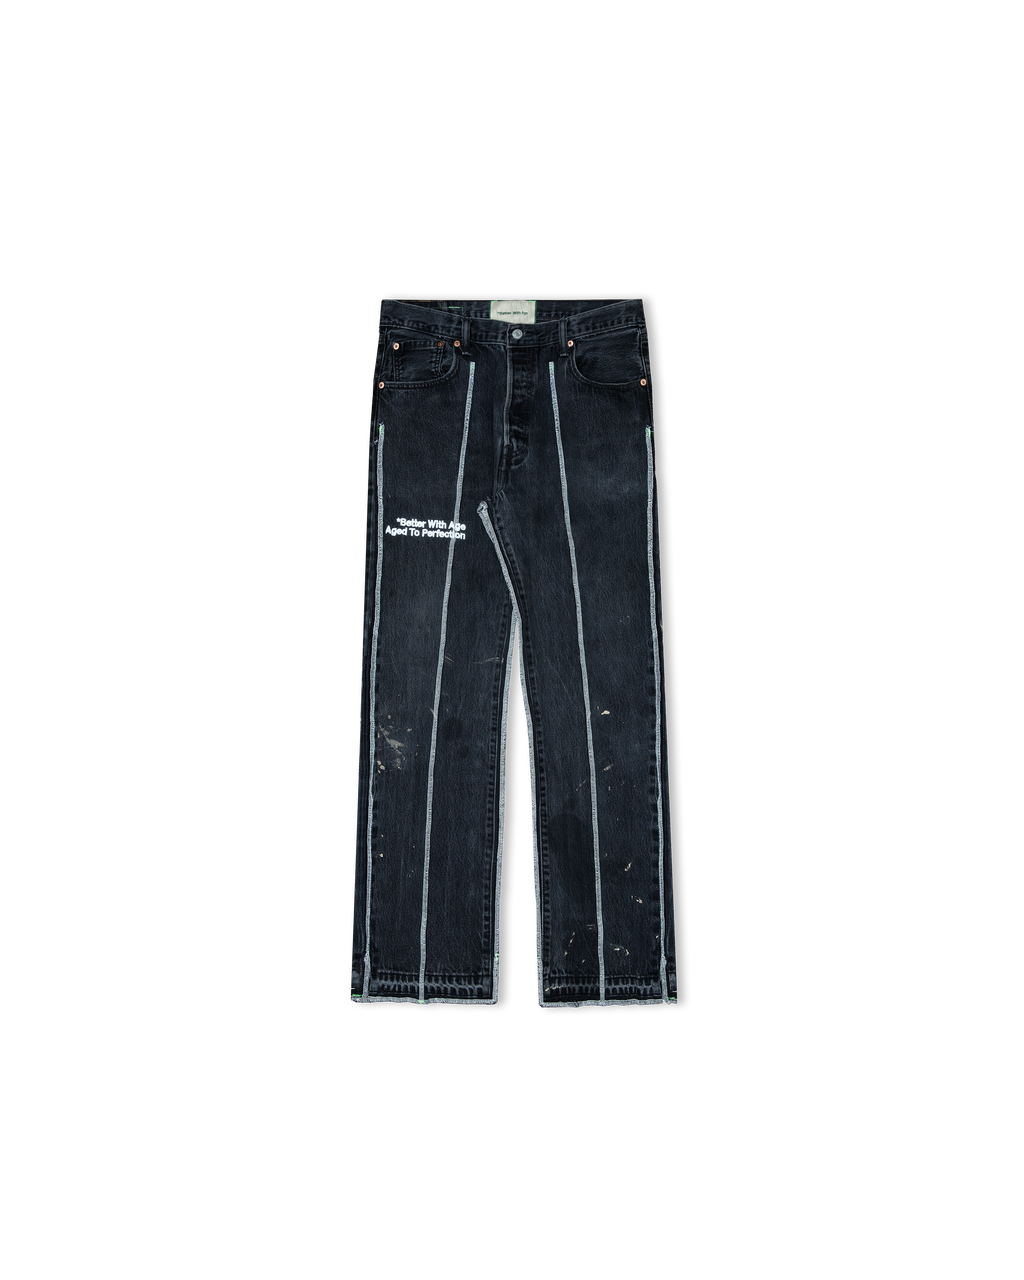 BLACK DERBY - PLEATED LEVI'S 501